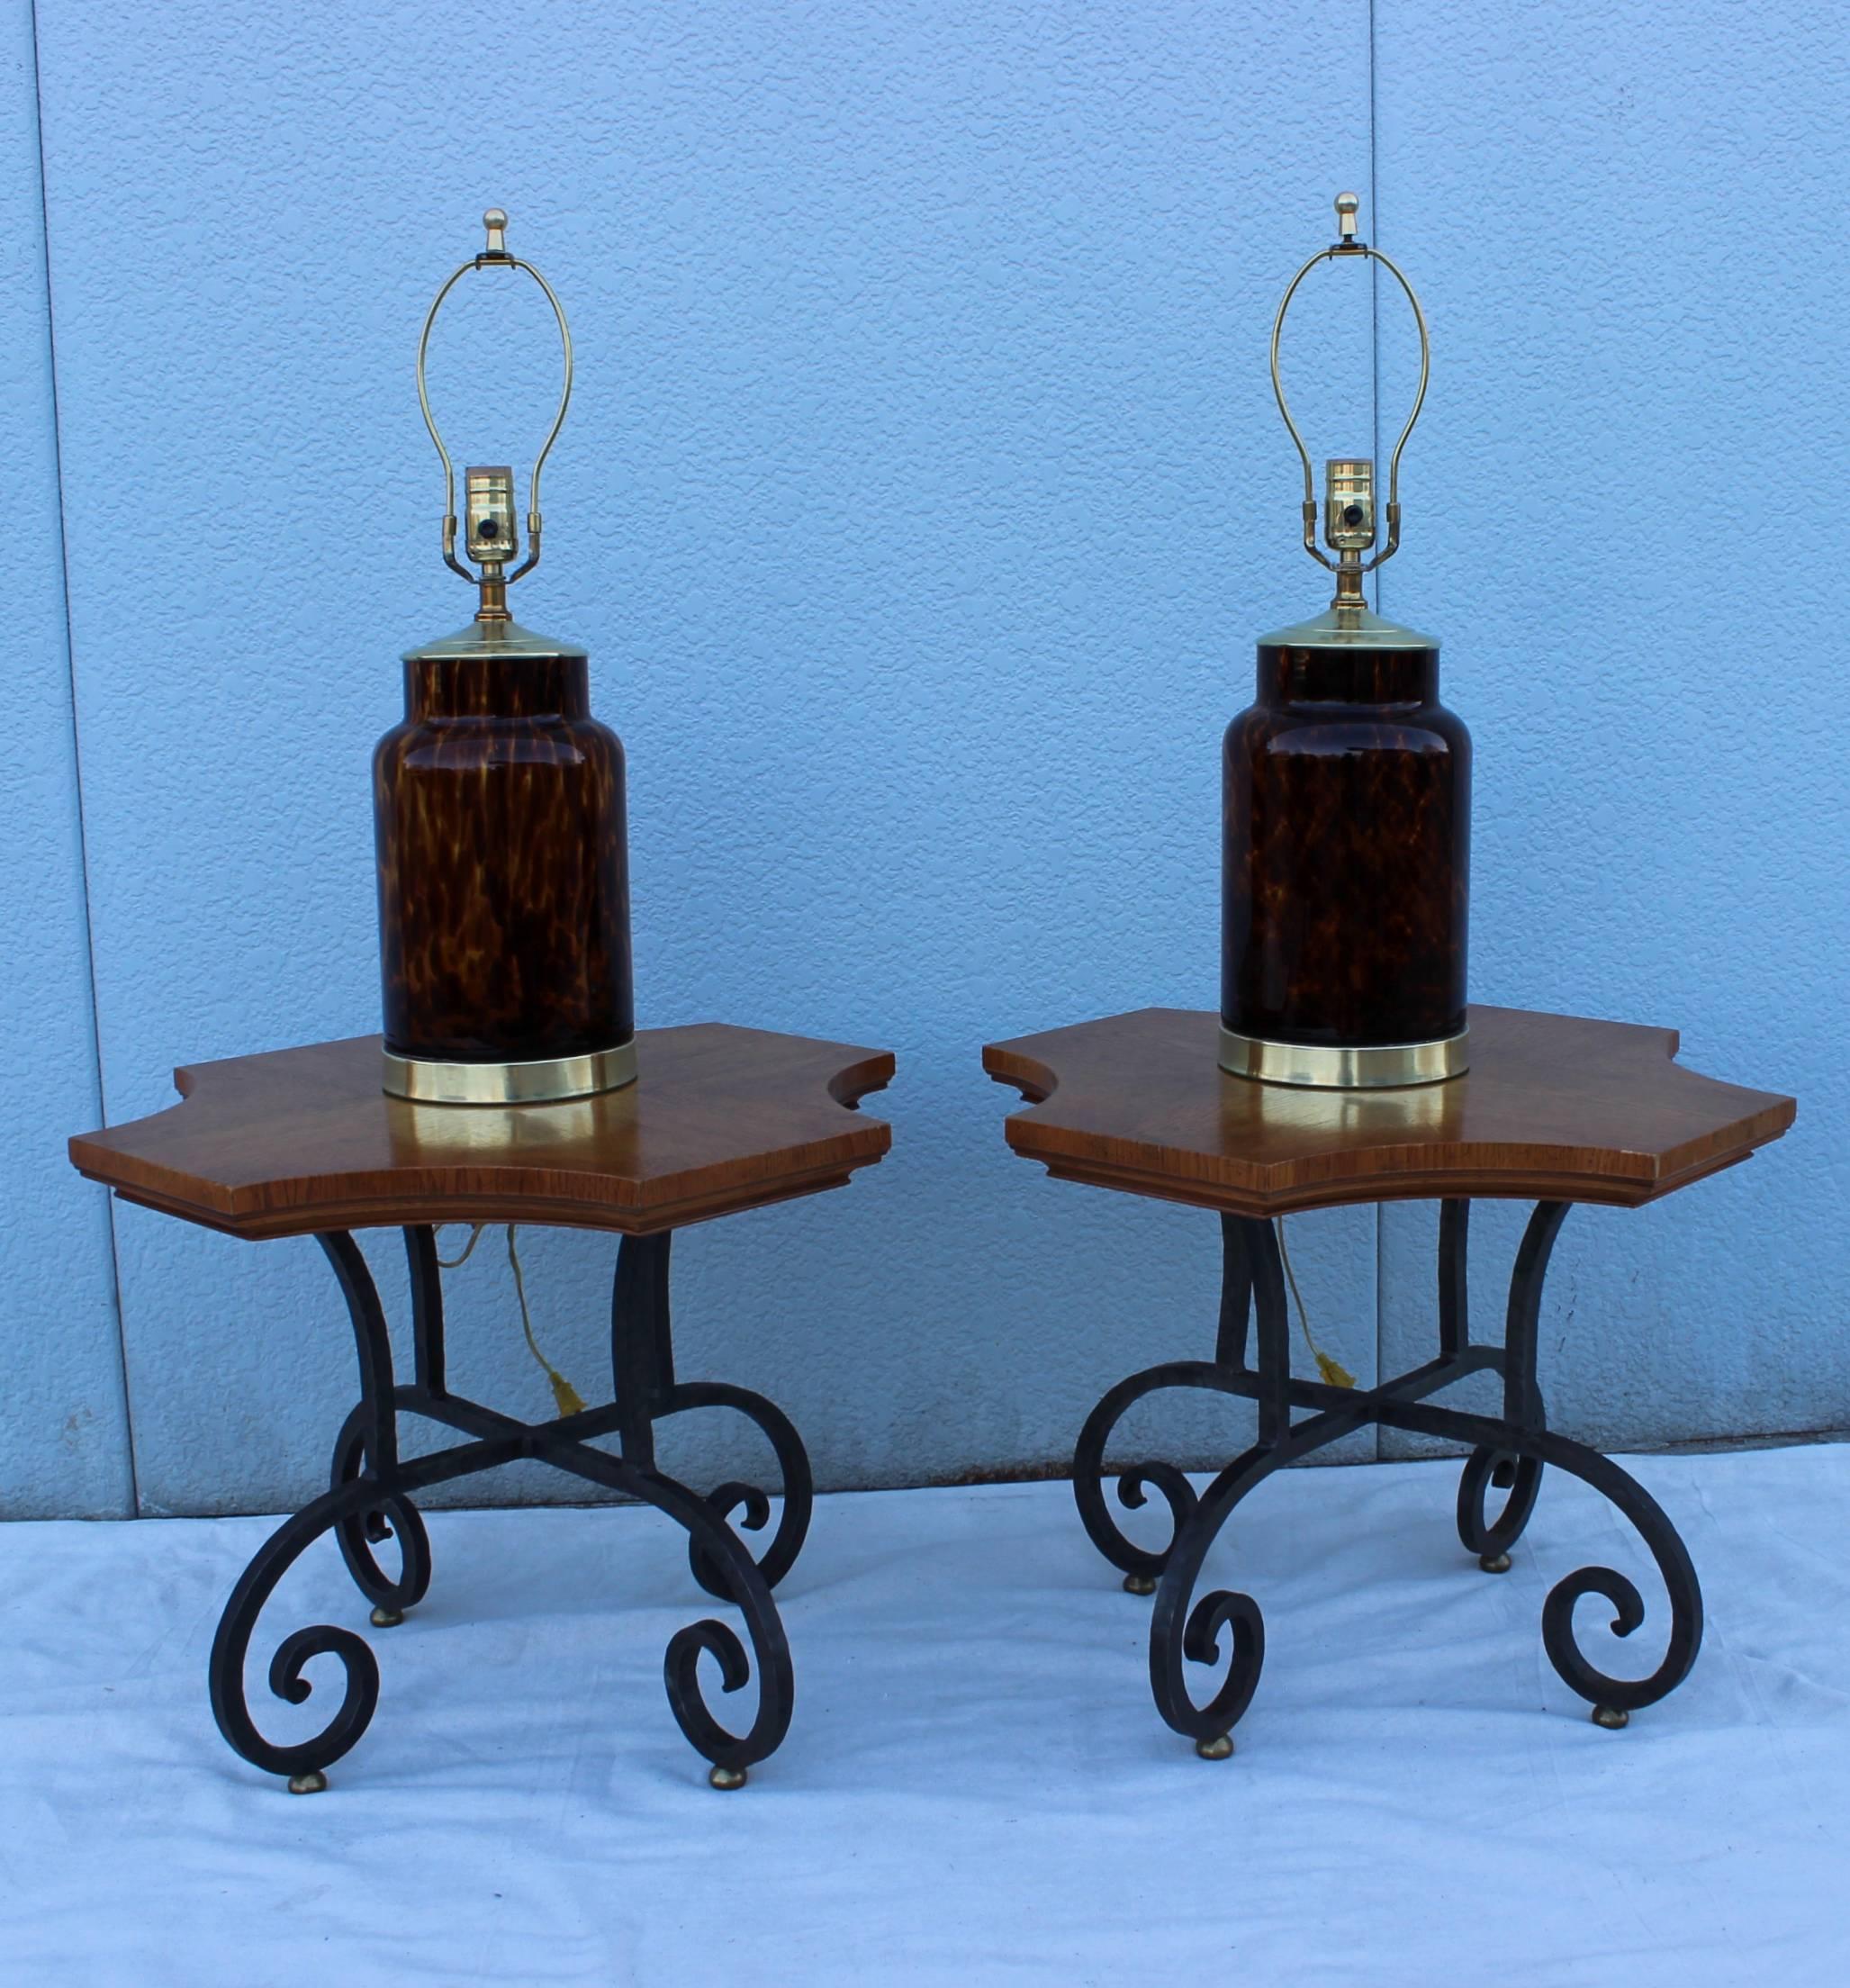 1960s Murano tortoise shell with brass hardware small table lamps.

Height to light socket 16.5''